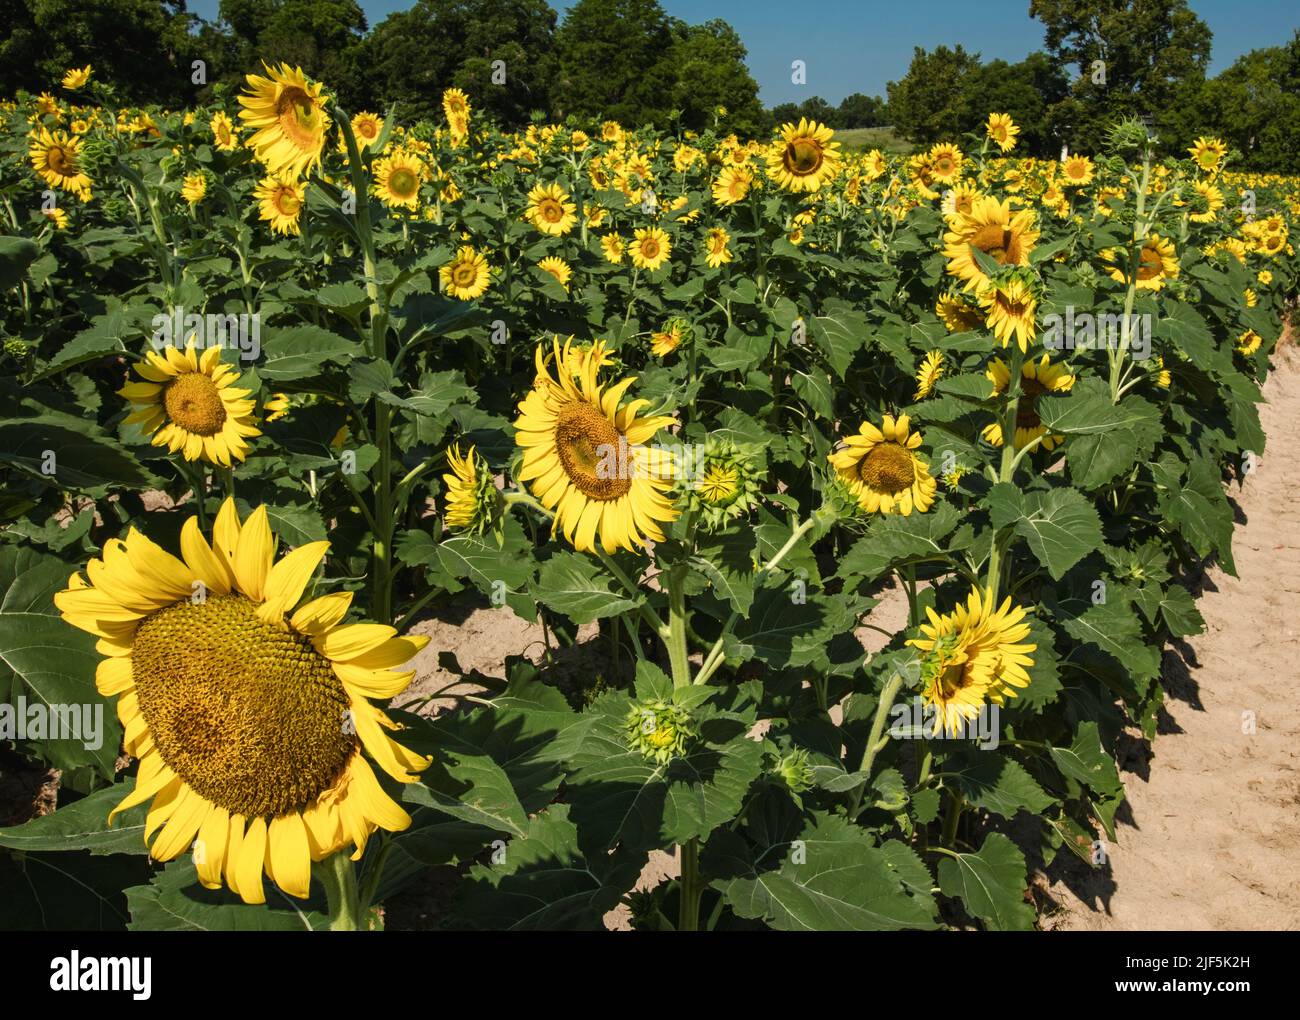 The common sunflower (Helianthus annuus) is a large annual forb of the genus Helianthus grown as a crop for its edible oil and edible fruits. Stock Photo